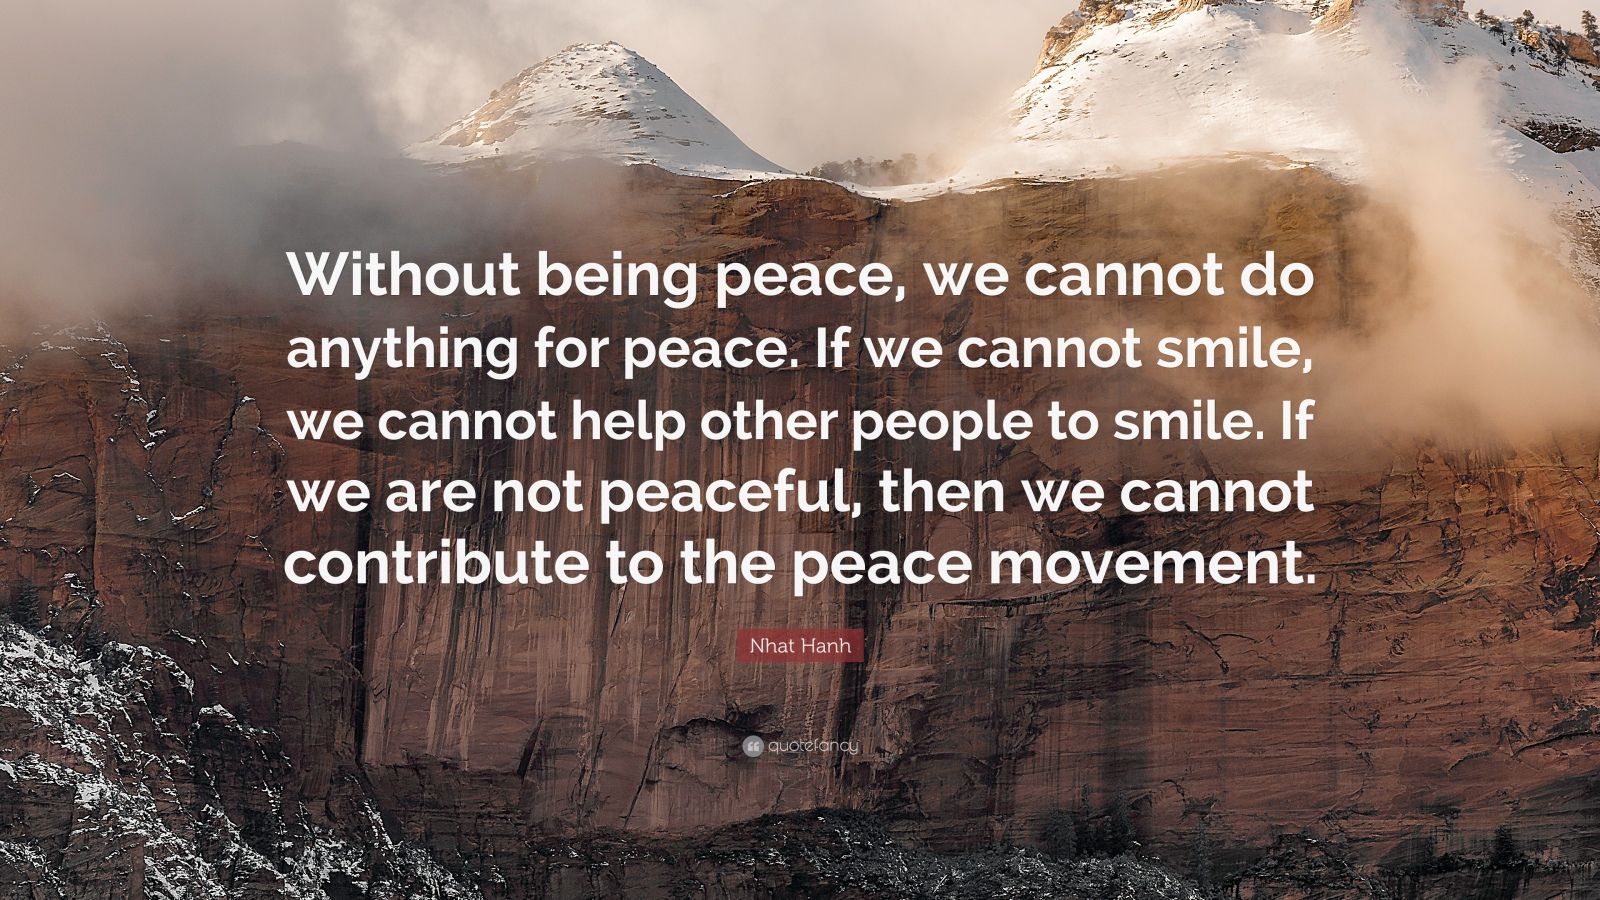 Nhat Hanh Quote: “Without being peace, we cannot do anything for peace ...